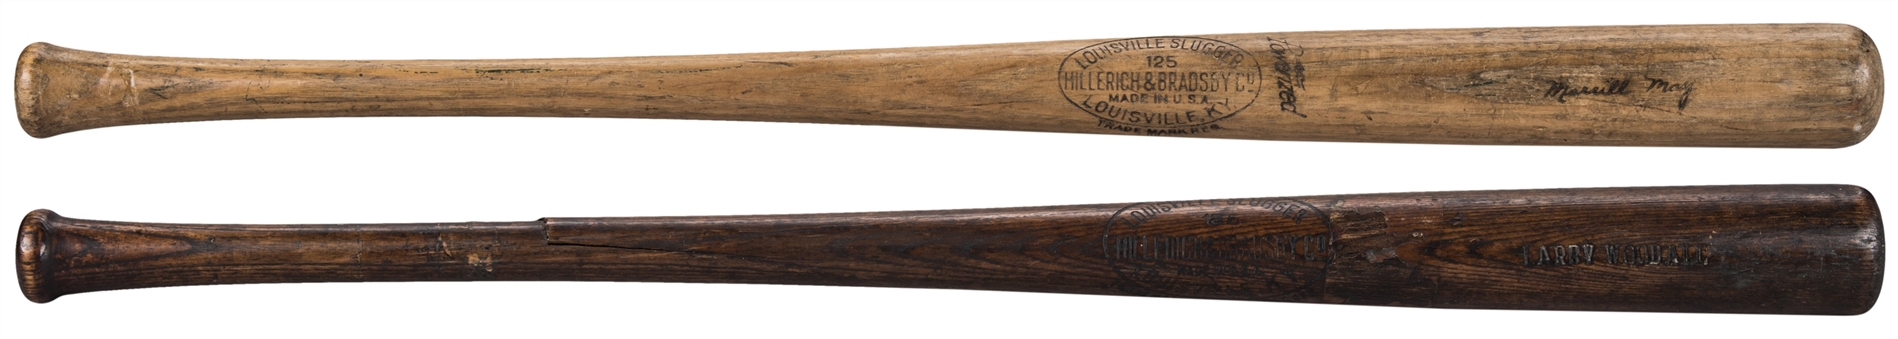 Lot of (2) Game Used Hillerich & Bradsby Pre-Model Bats Including Larry Woodall and Merrill May (PSA/DNA)